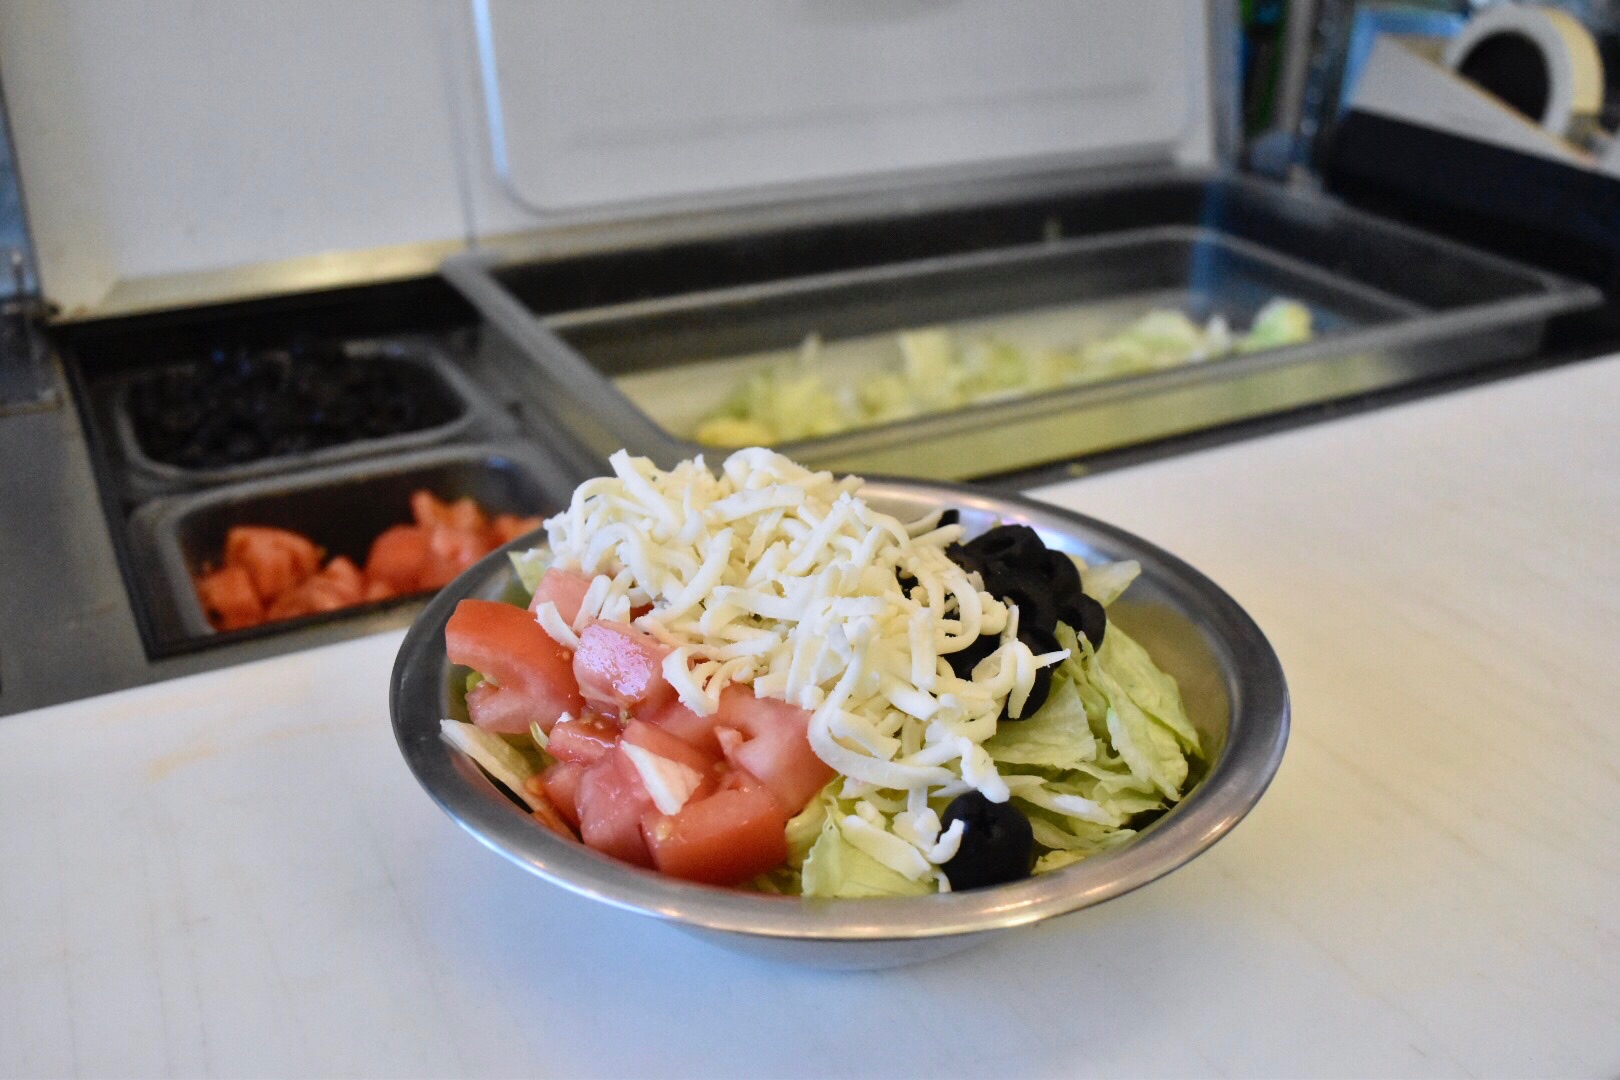 Photo of Salad on table with tomatos, cheese, and olives